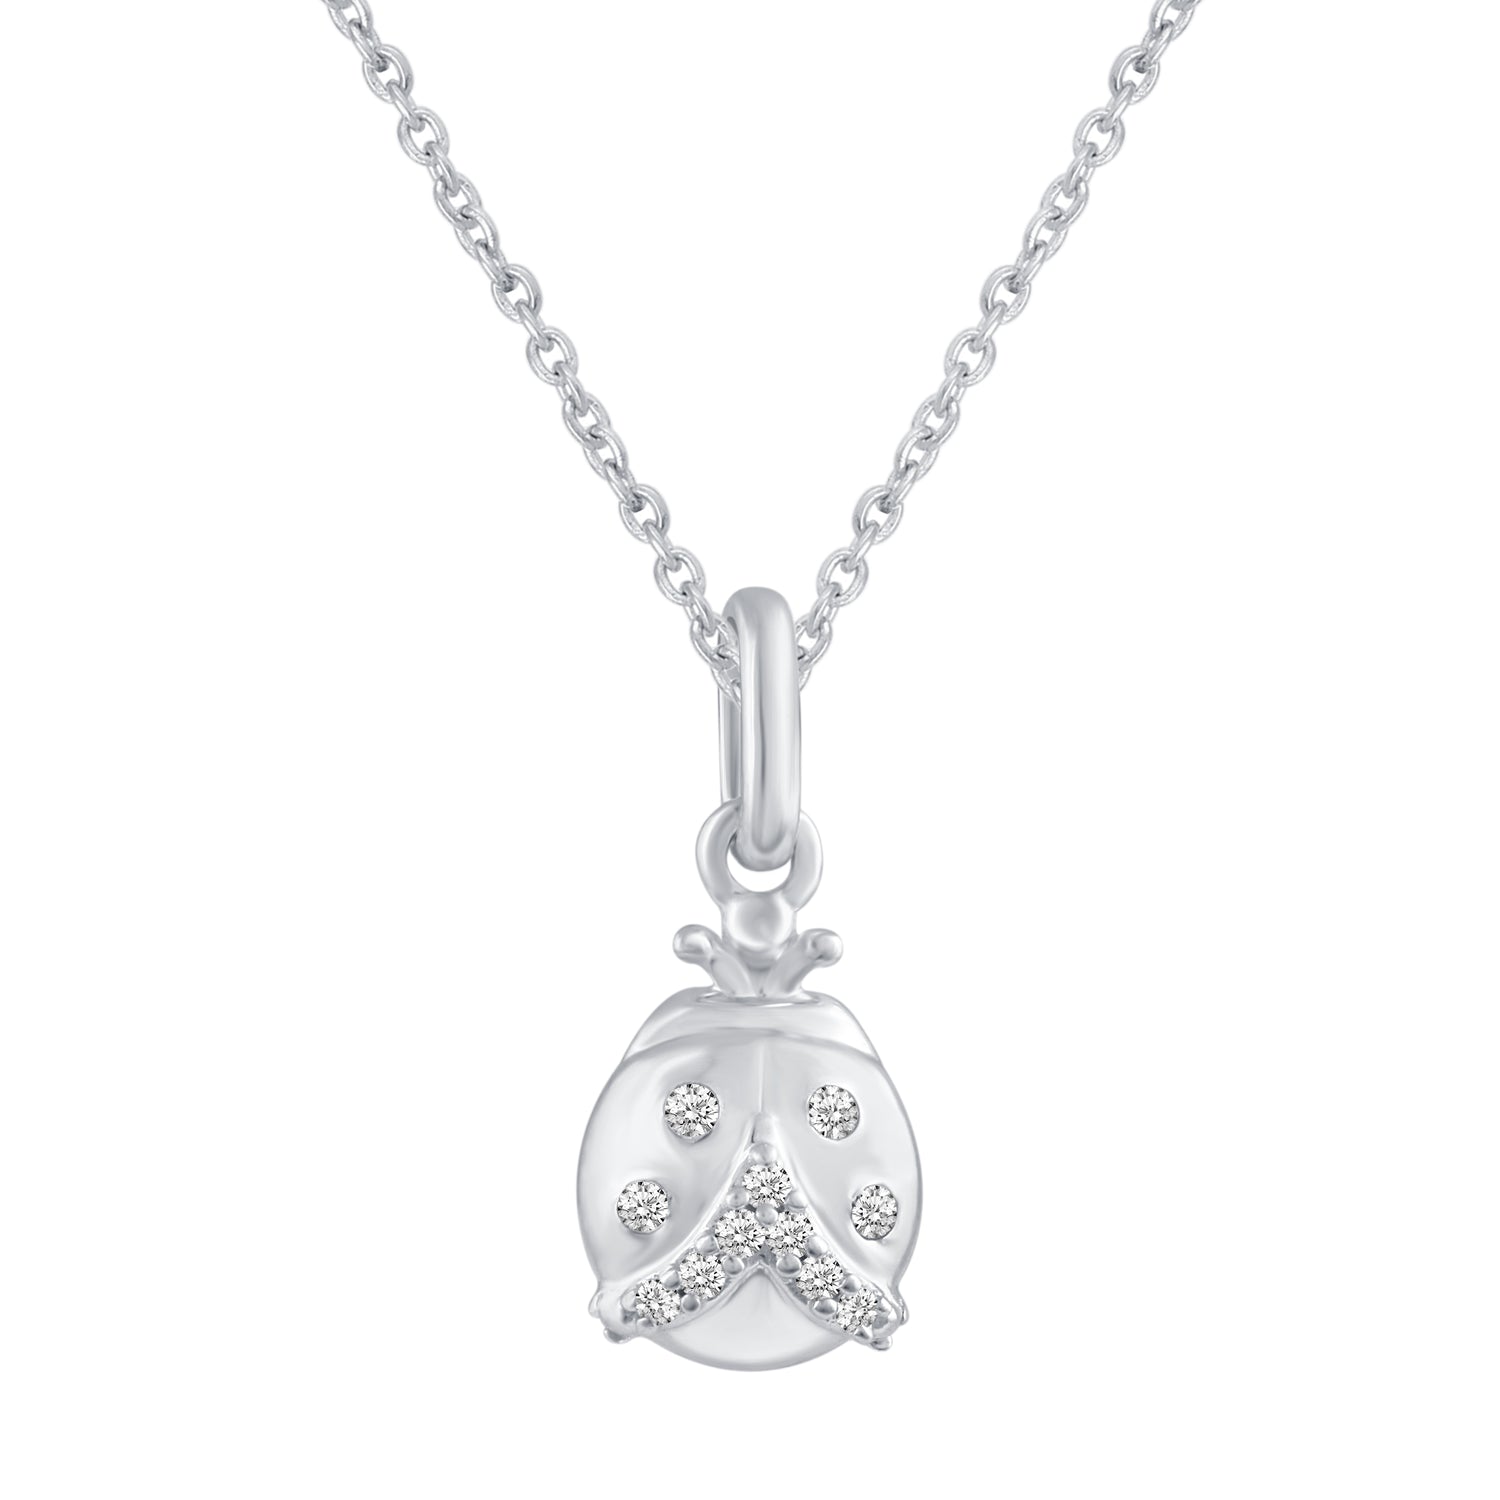 LadyBug 1/20 Cttw Natural Diamond Pendant Necklace set in 925 Sterling Silver fine jewelry 